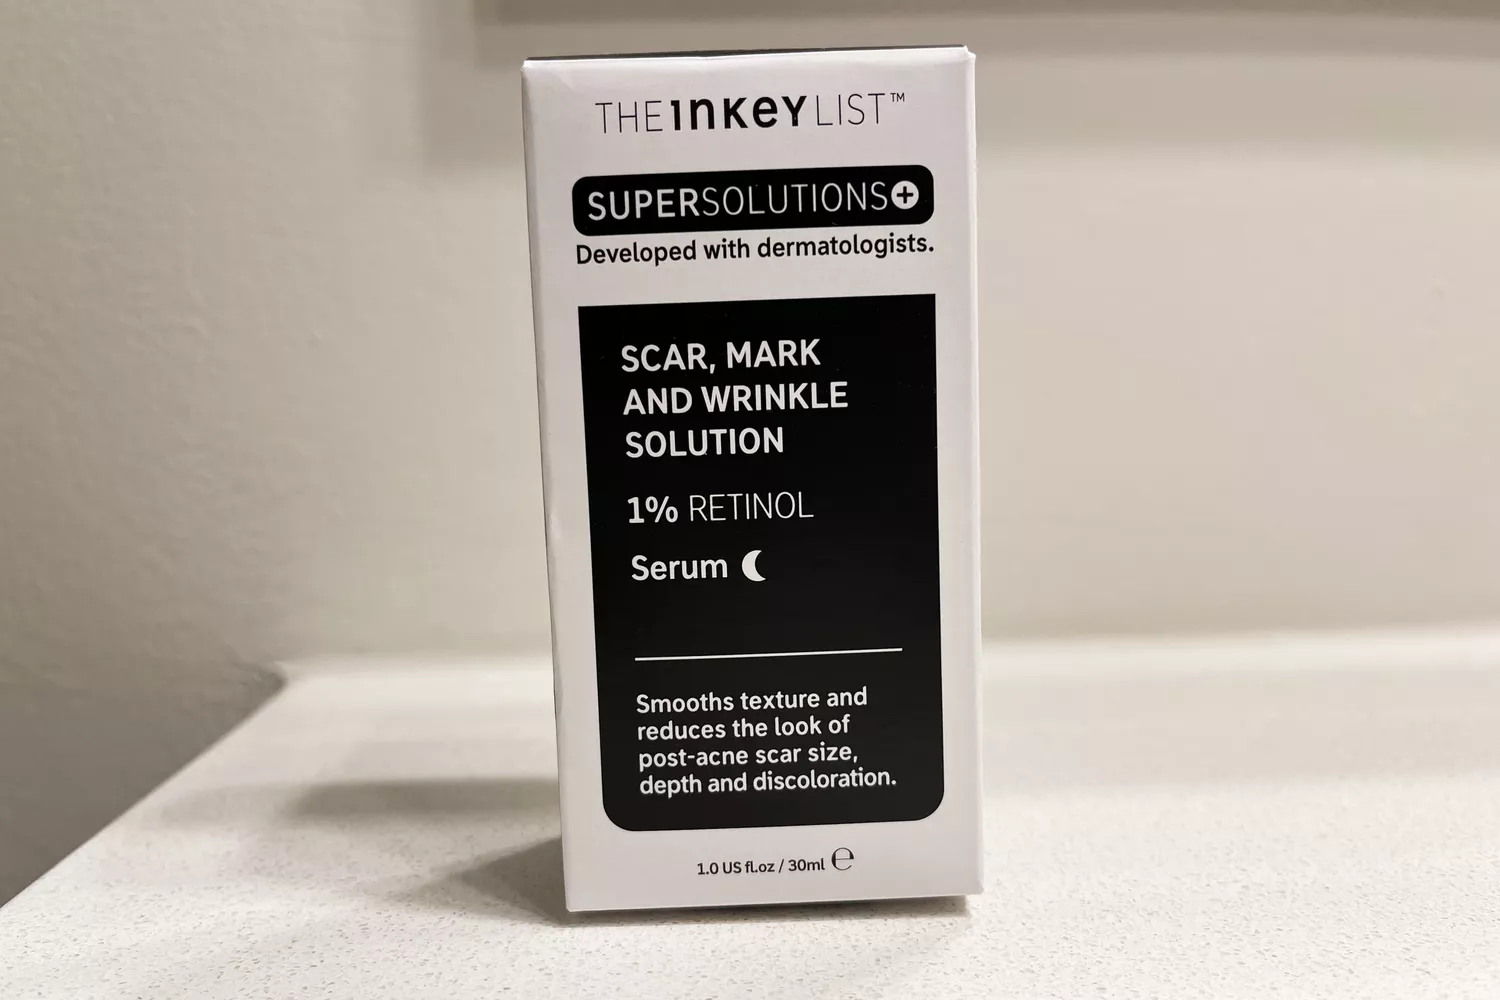 The packaging of the The INKEY List SuperSolutions 1% Retinol Serum